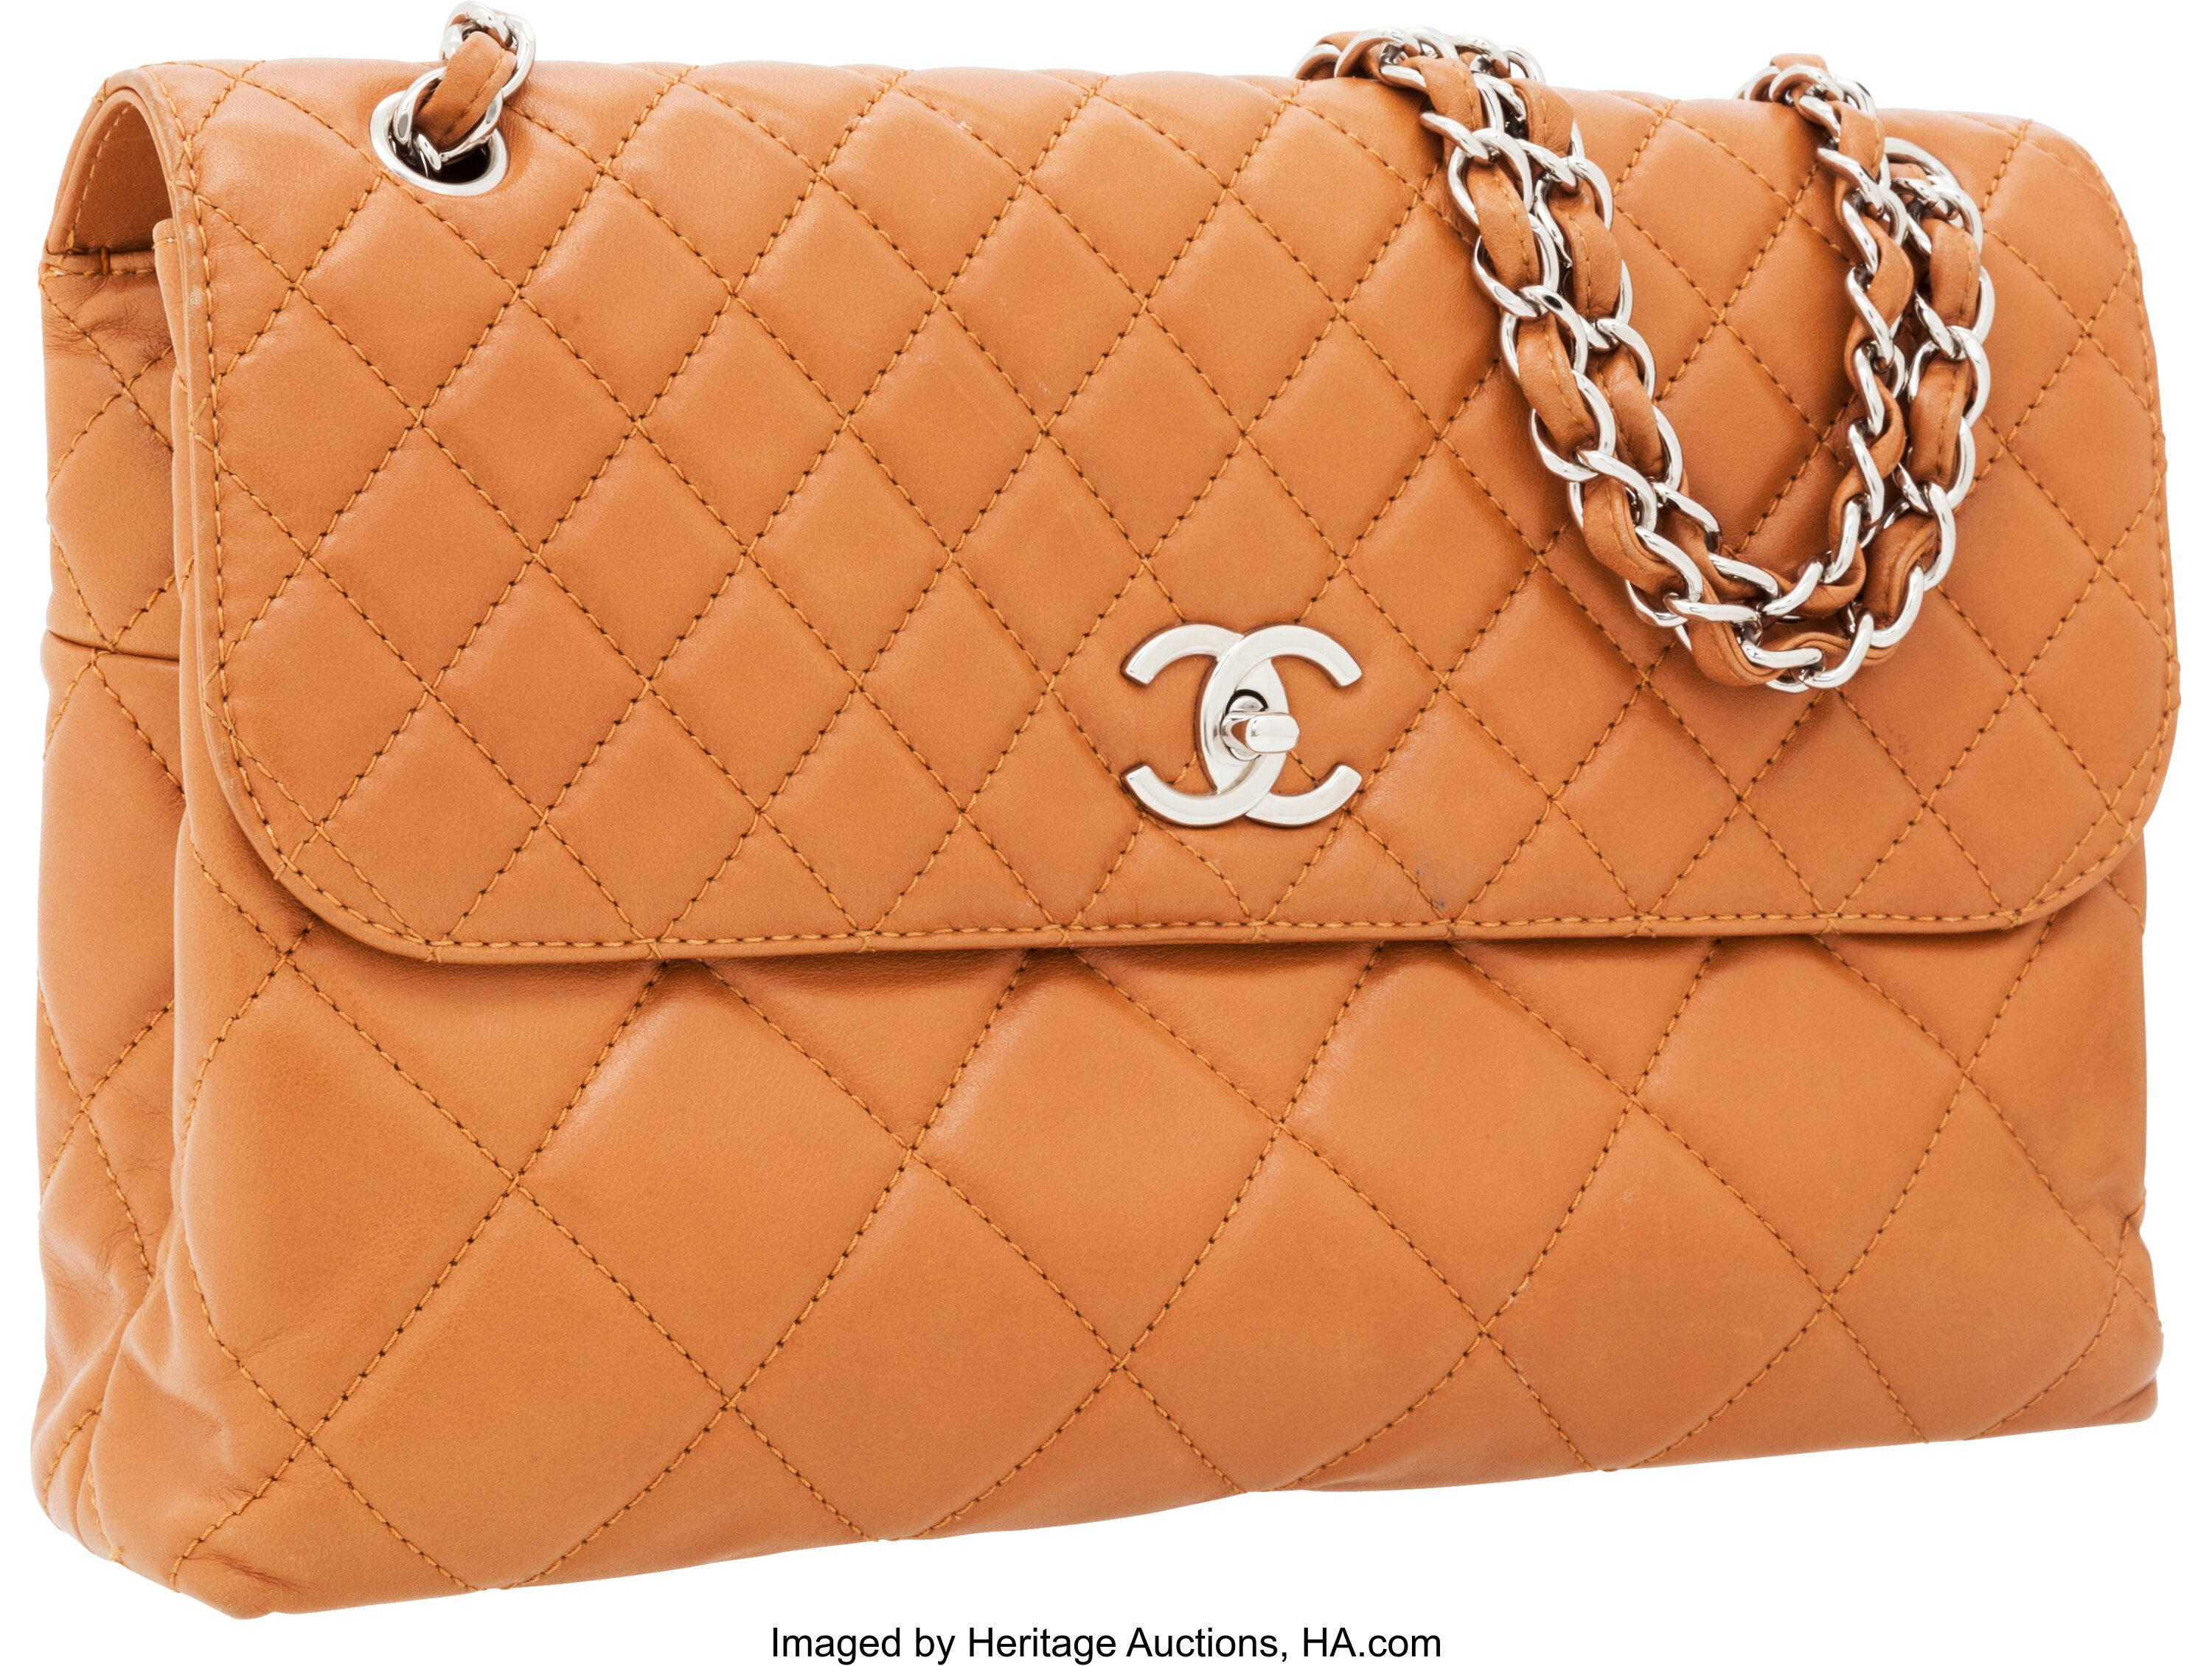 Sold at Auction: CHANEL BROWN LAMBSKIN BUBBLE QUILTED SHOULDER BAG